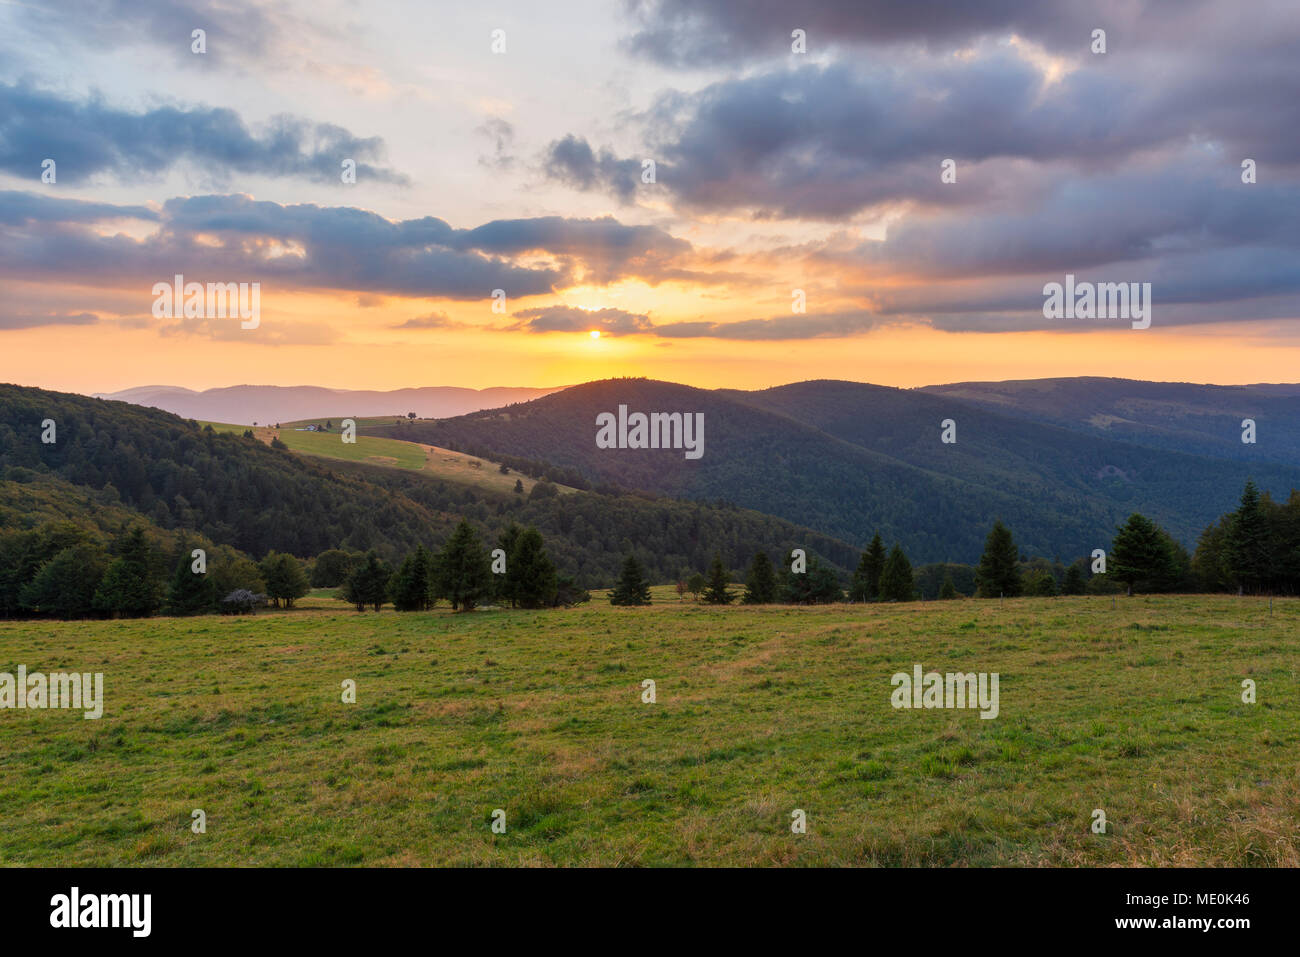 Mountain landscape with sunset over the Vosges Mountains at Le Markstein in Haut-Rhin, France Stock Photo